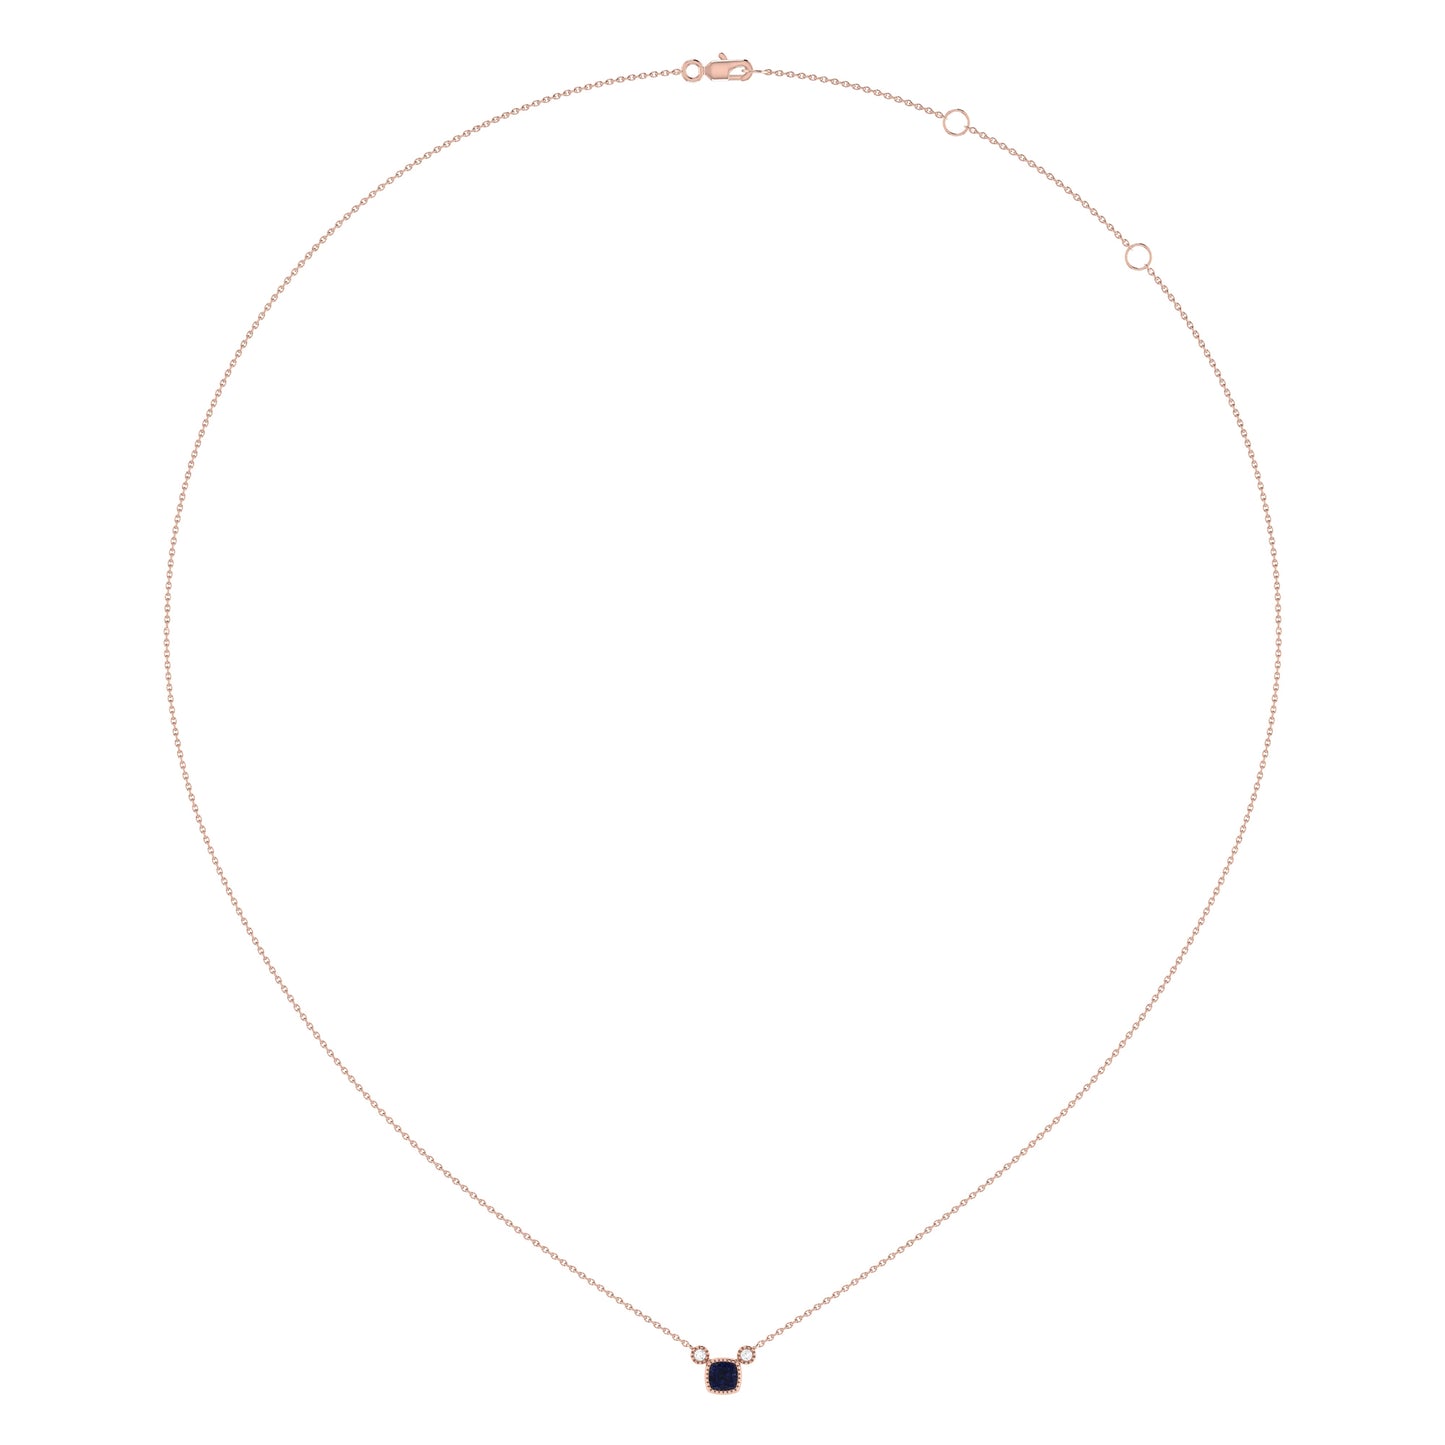 Cushion Cut Sapphire & Diamond Birthstone Necklace In 14K Rose Gold by LuvMyJewelry